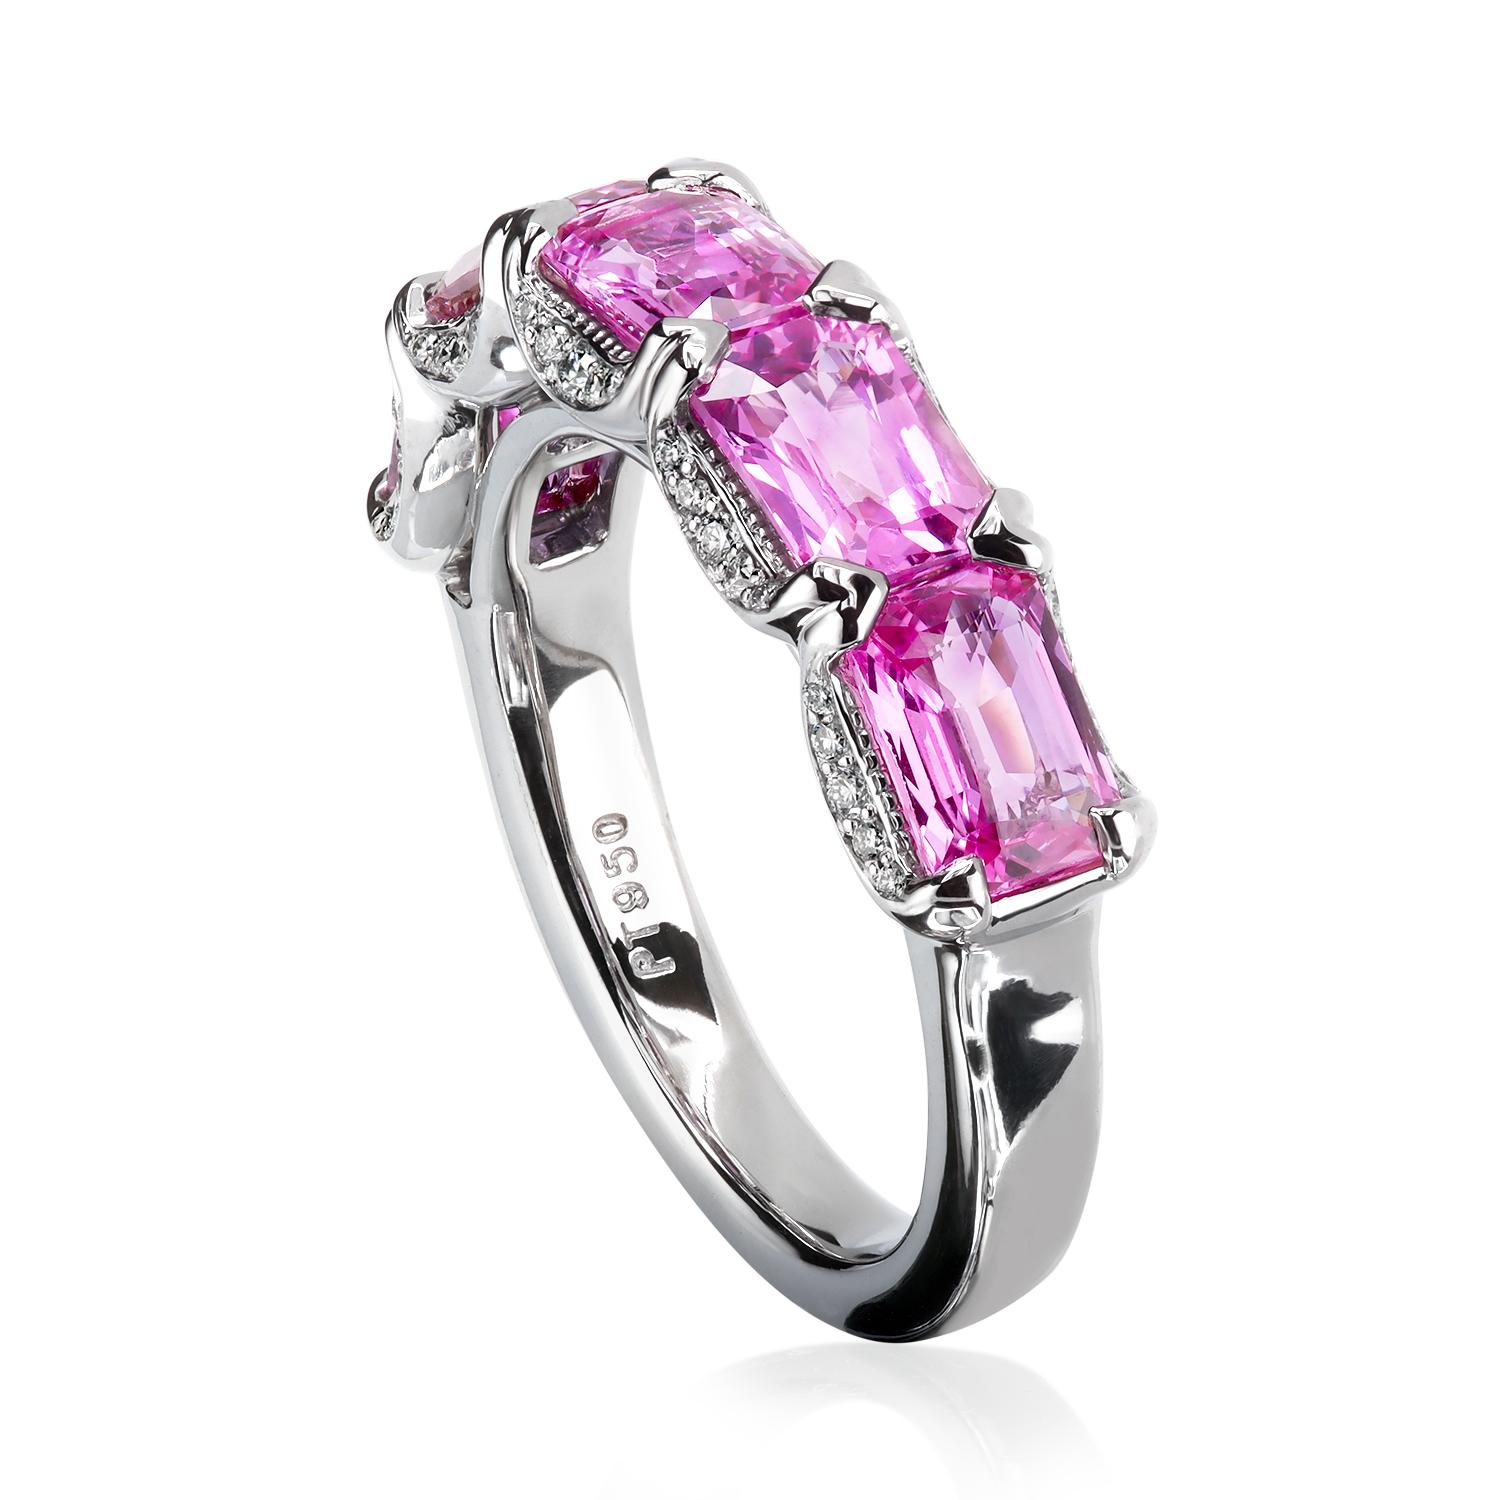 Contemporary Platinum East West Band with Pink Emerald Cut Natural Sapphires by Leon Mege